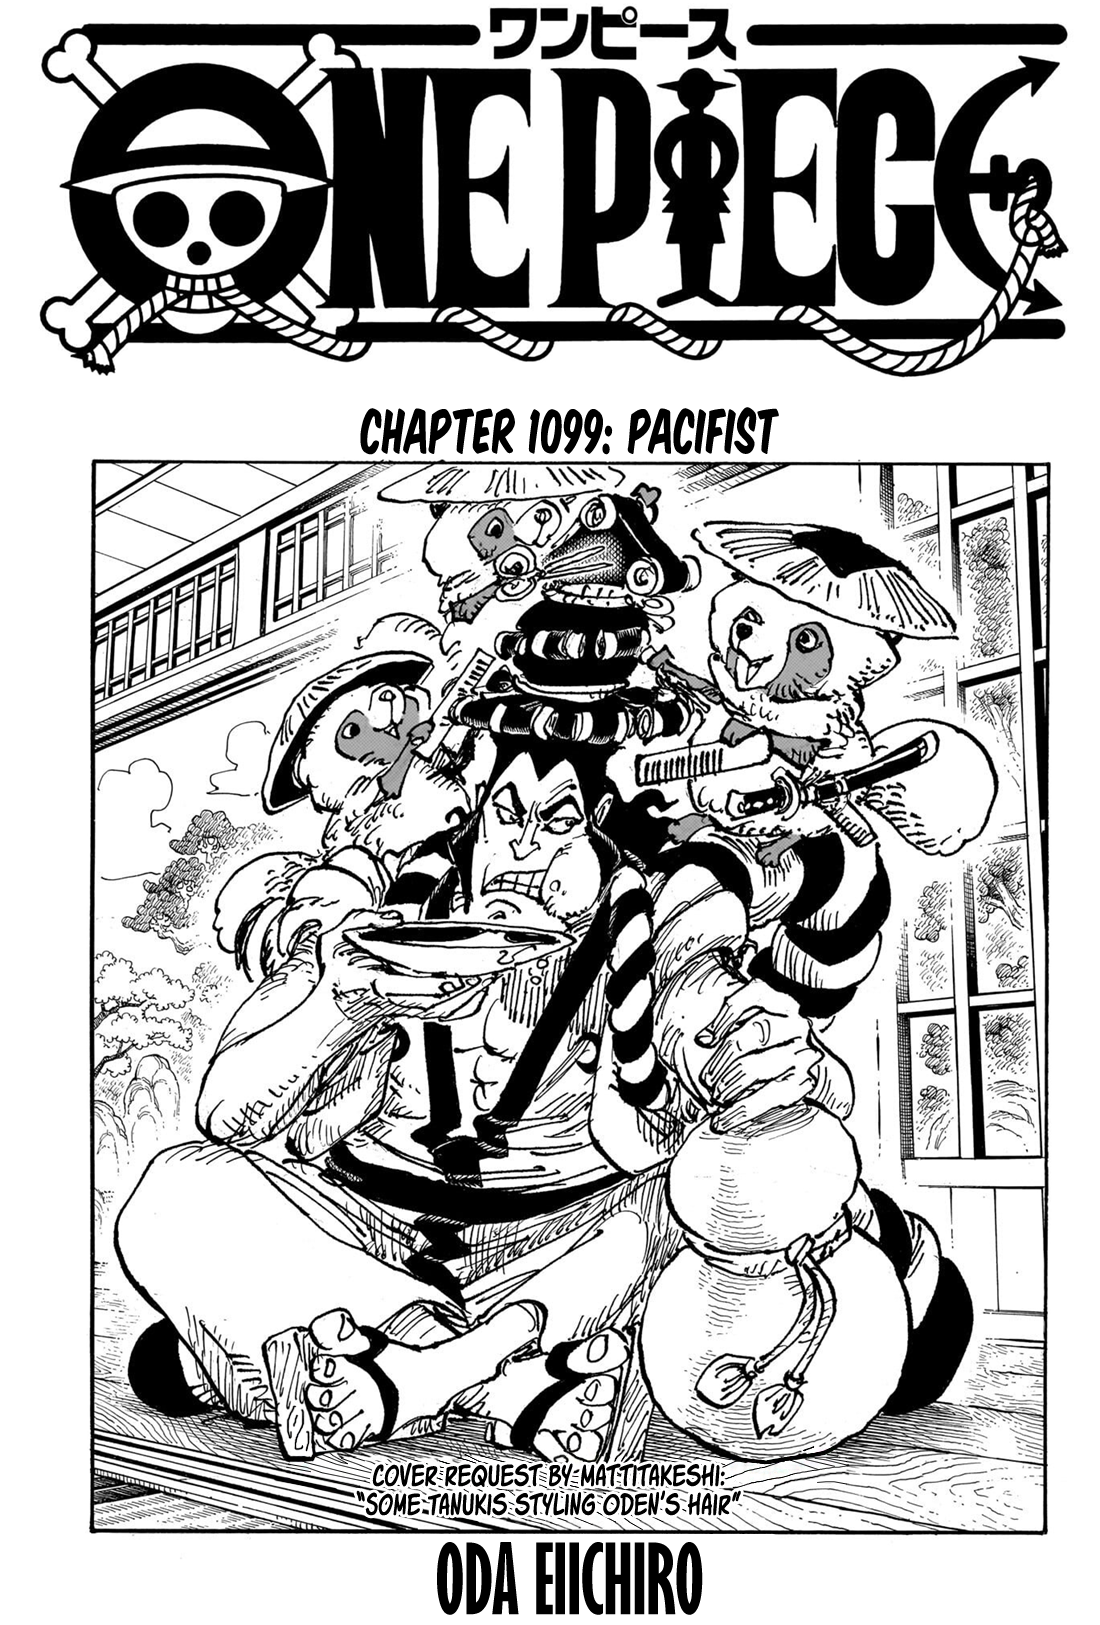 One Piece, Chapter 1093  TcbScans Org - Free Manga Online in High Quality